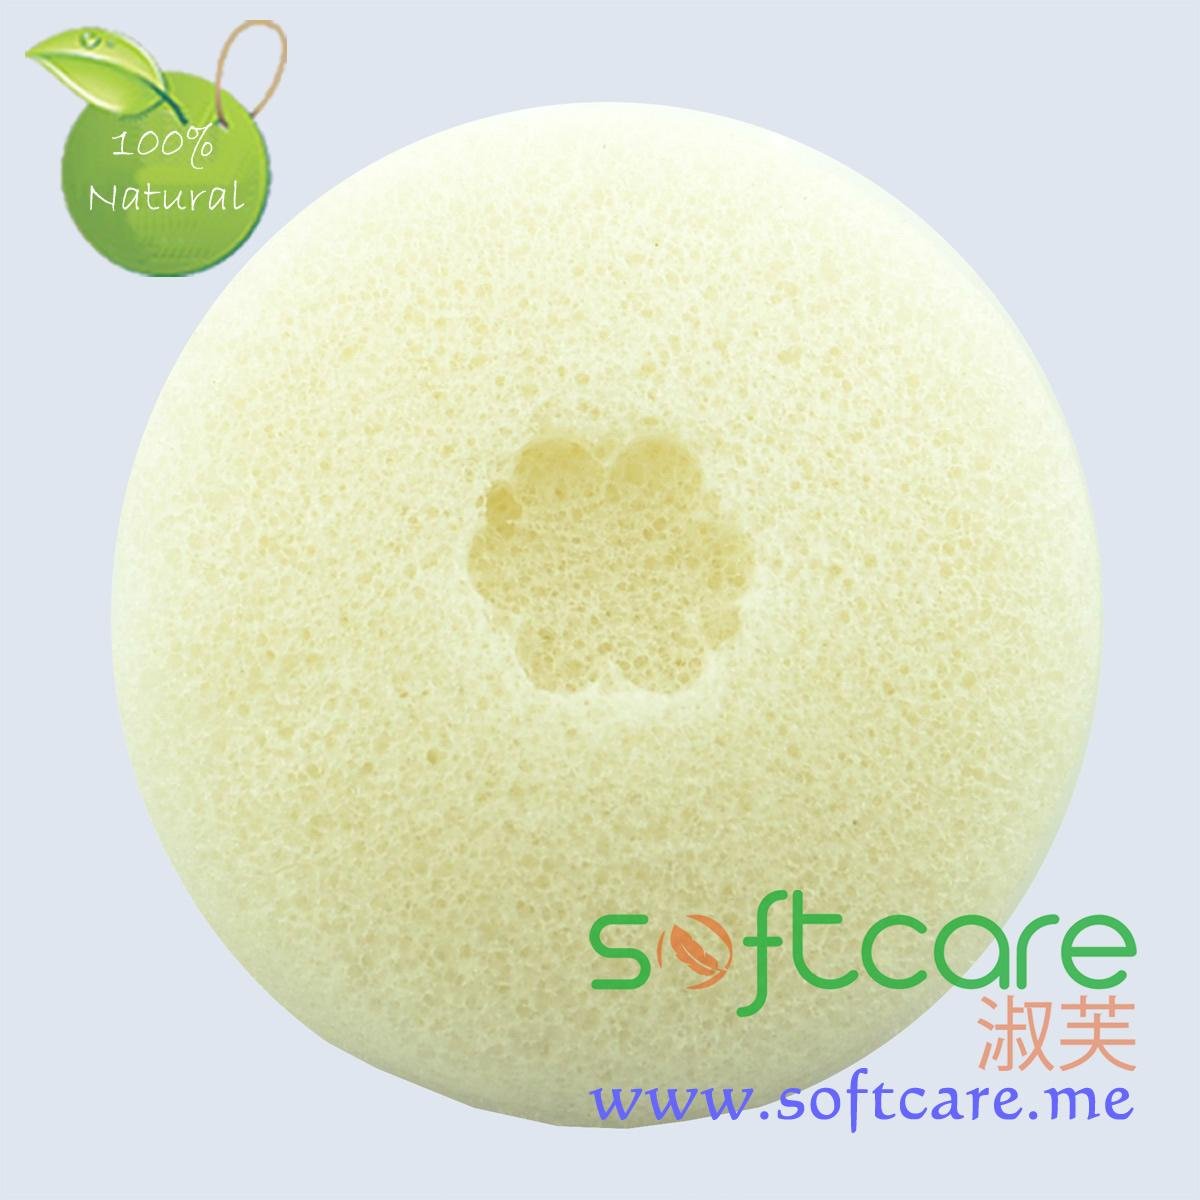 SOFTCARE round cake type 100% natural facial cleansing konjac sponge